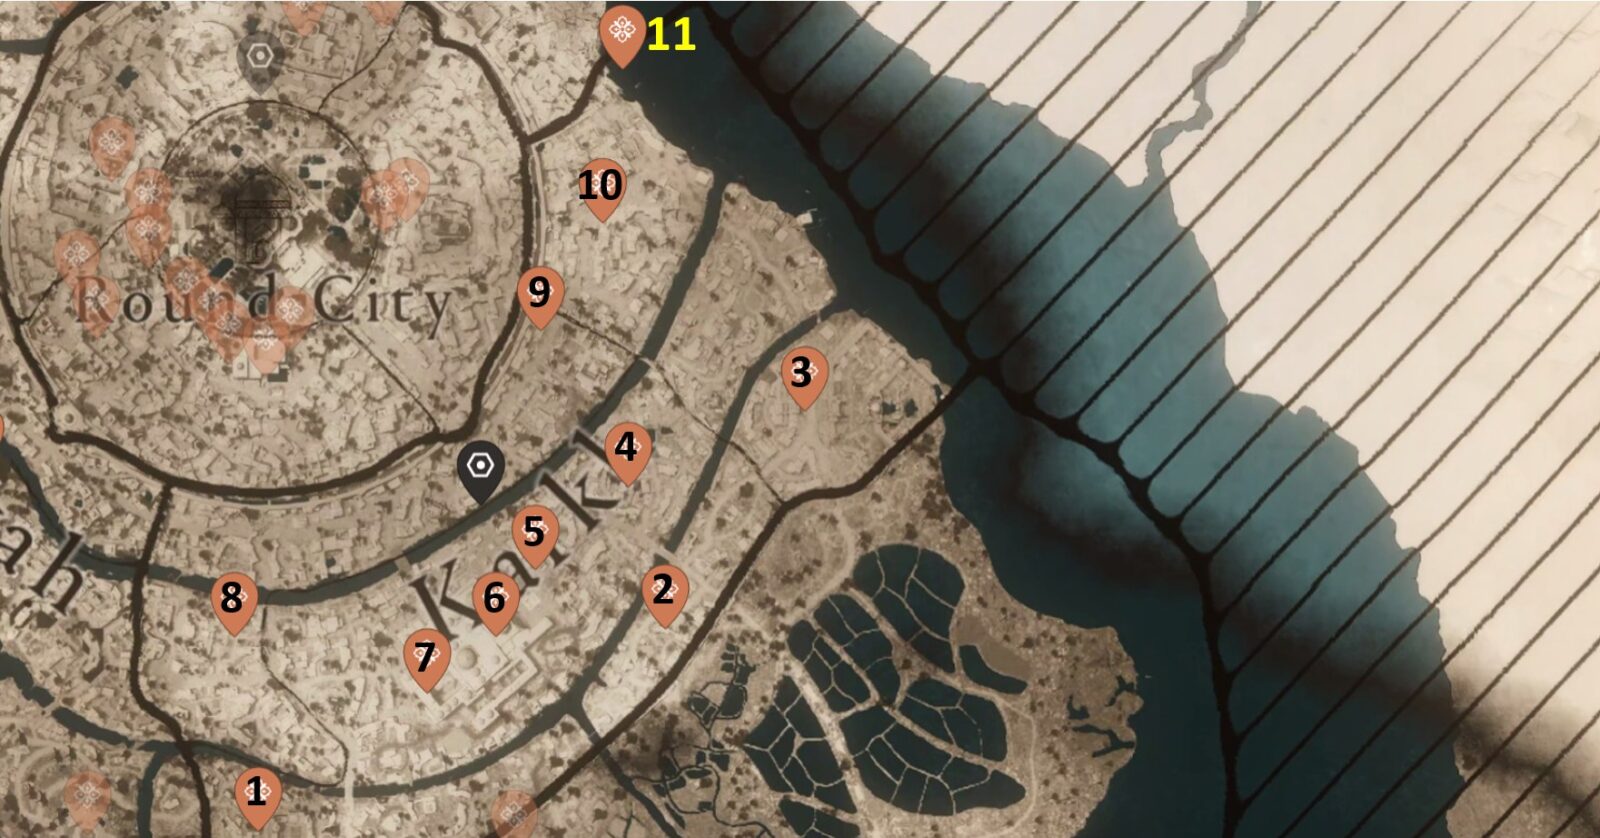 Karkh Historical Site locations in AC Mirage